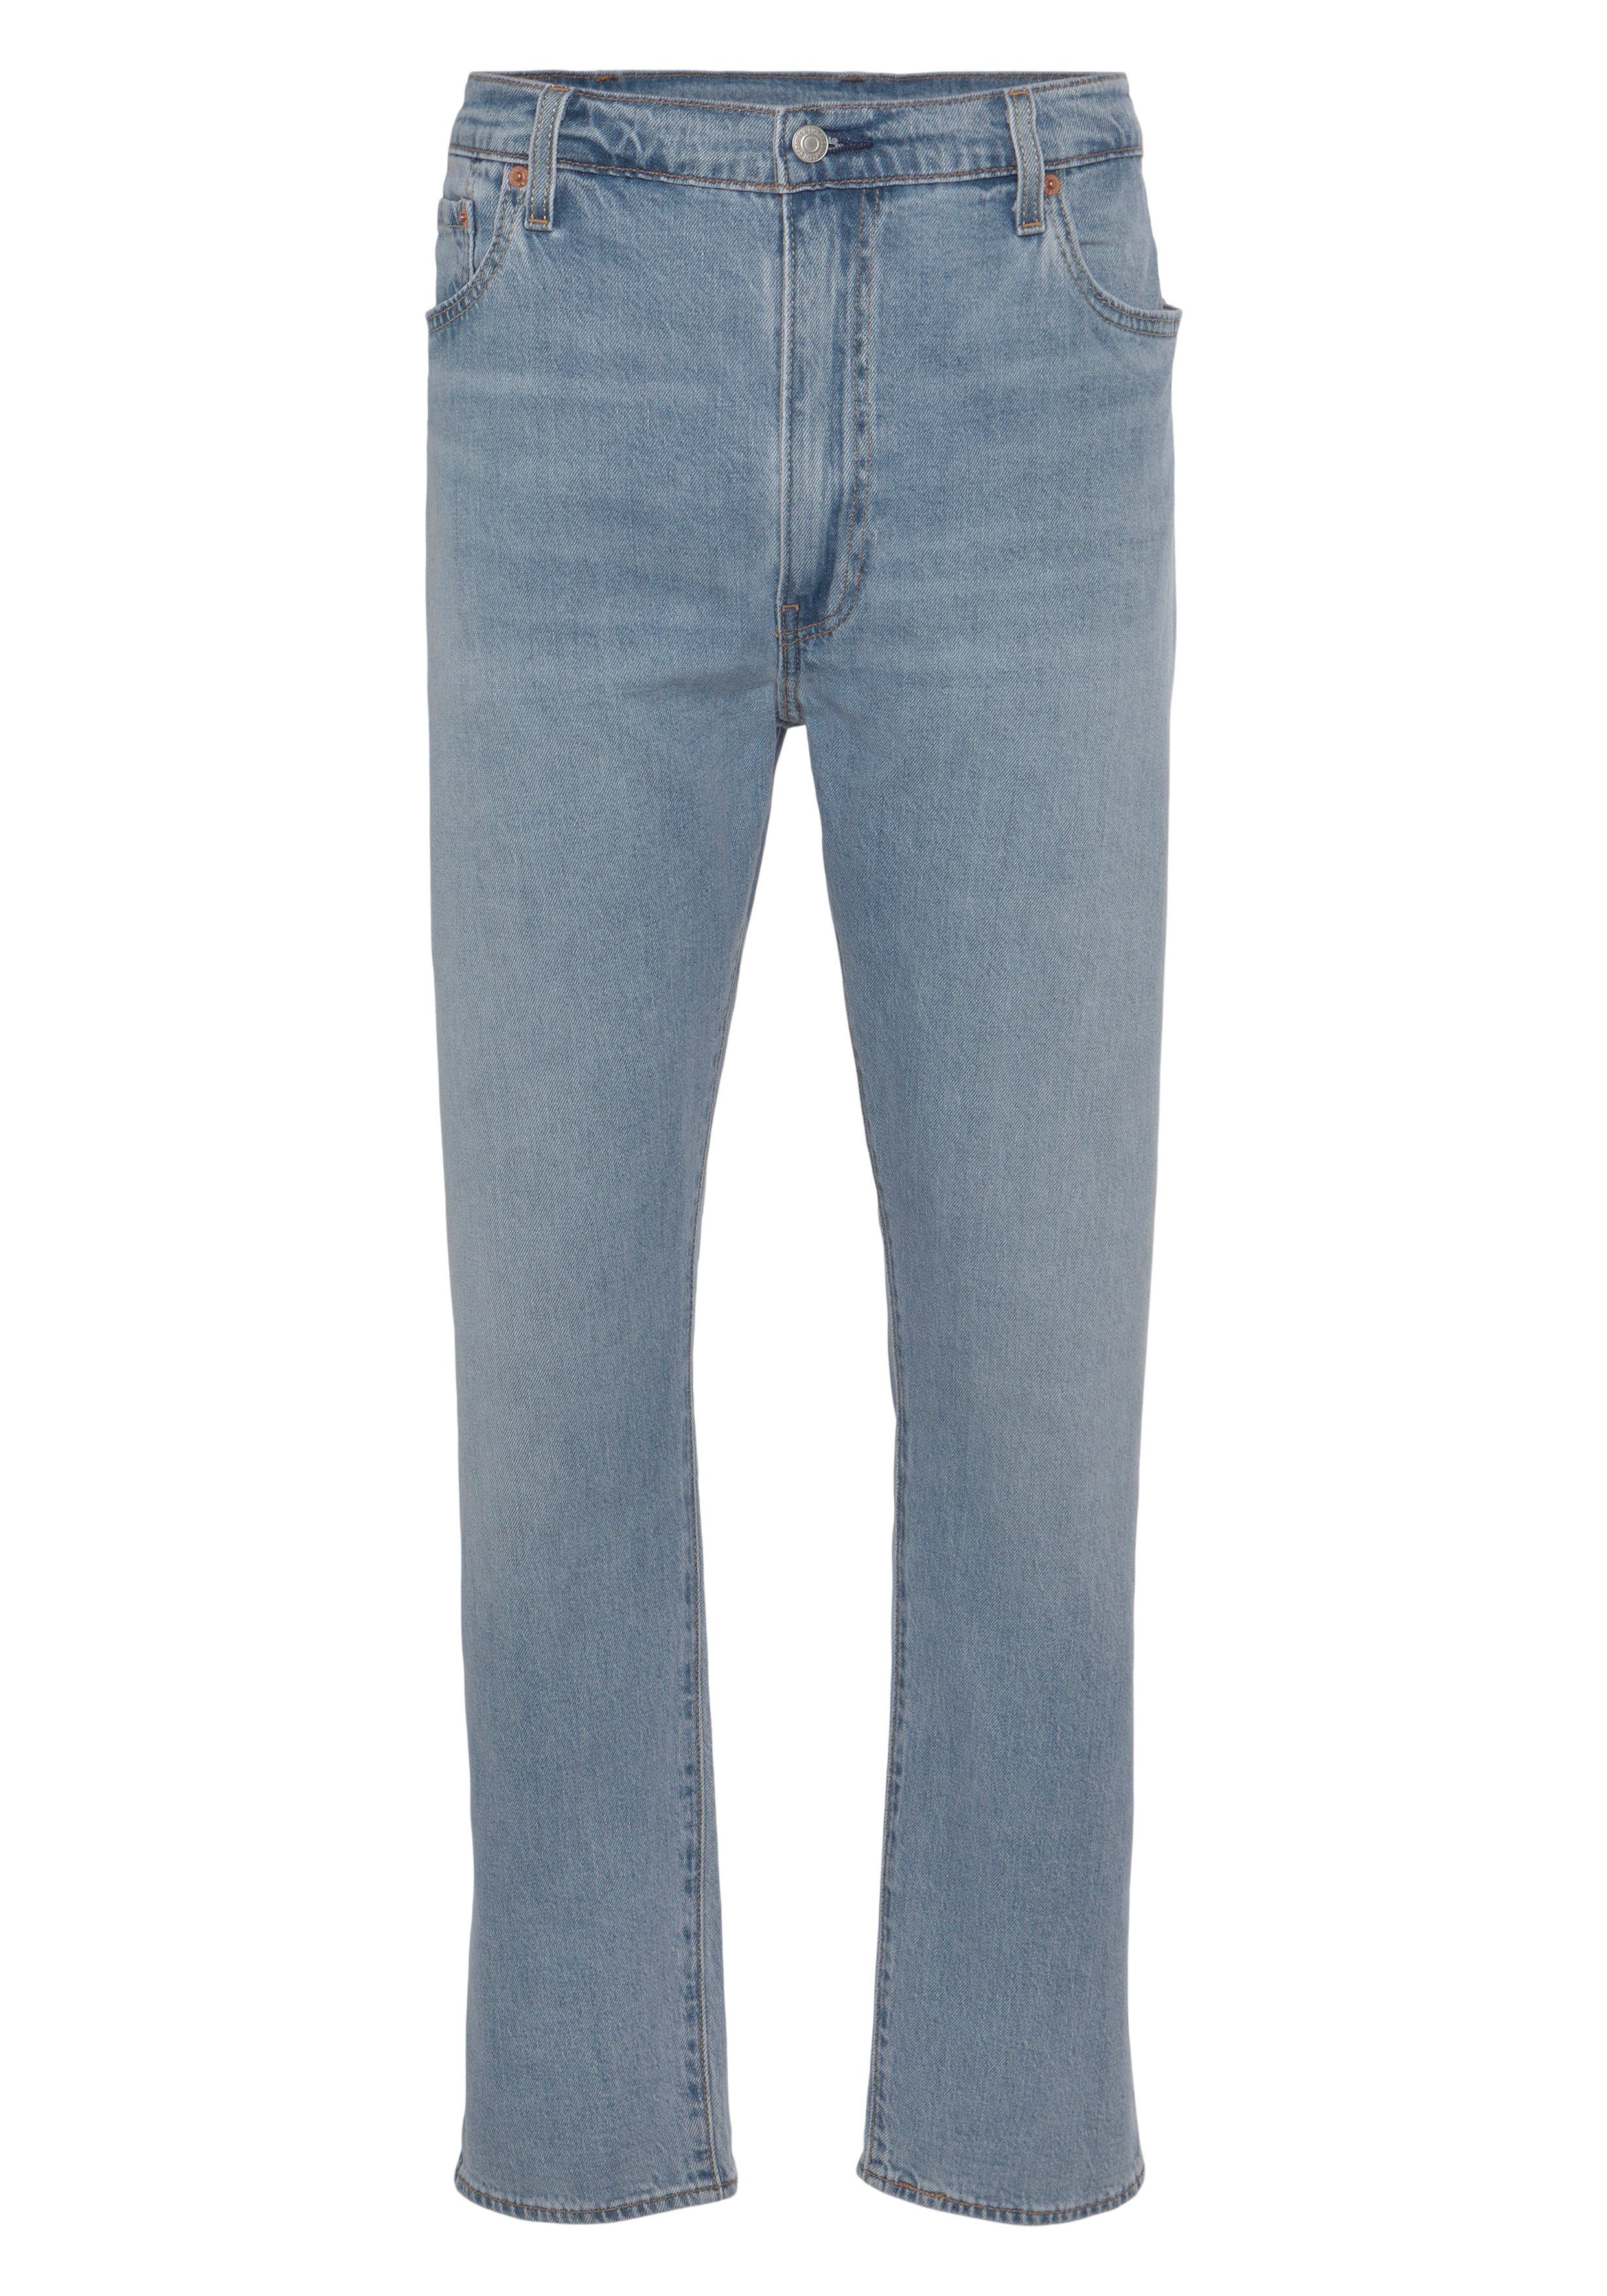 Waschung in OFF Levi's® CALL IT 512 authentischer Tapered-fit-Jeans Plus